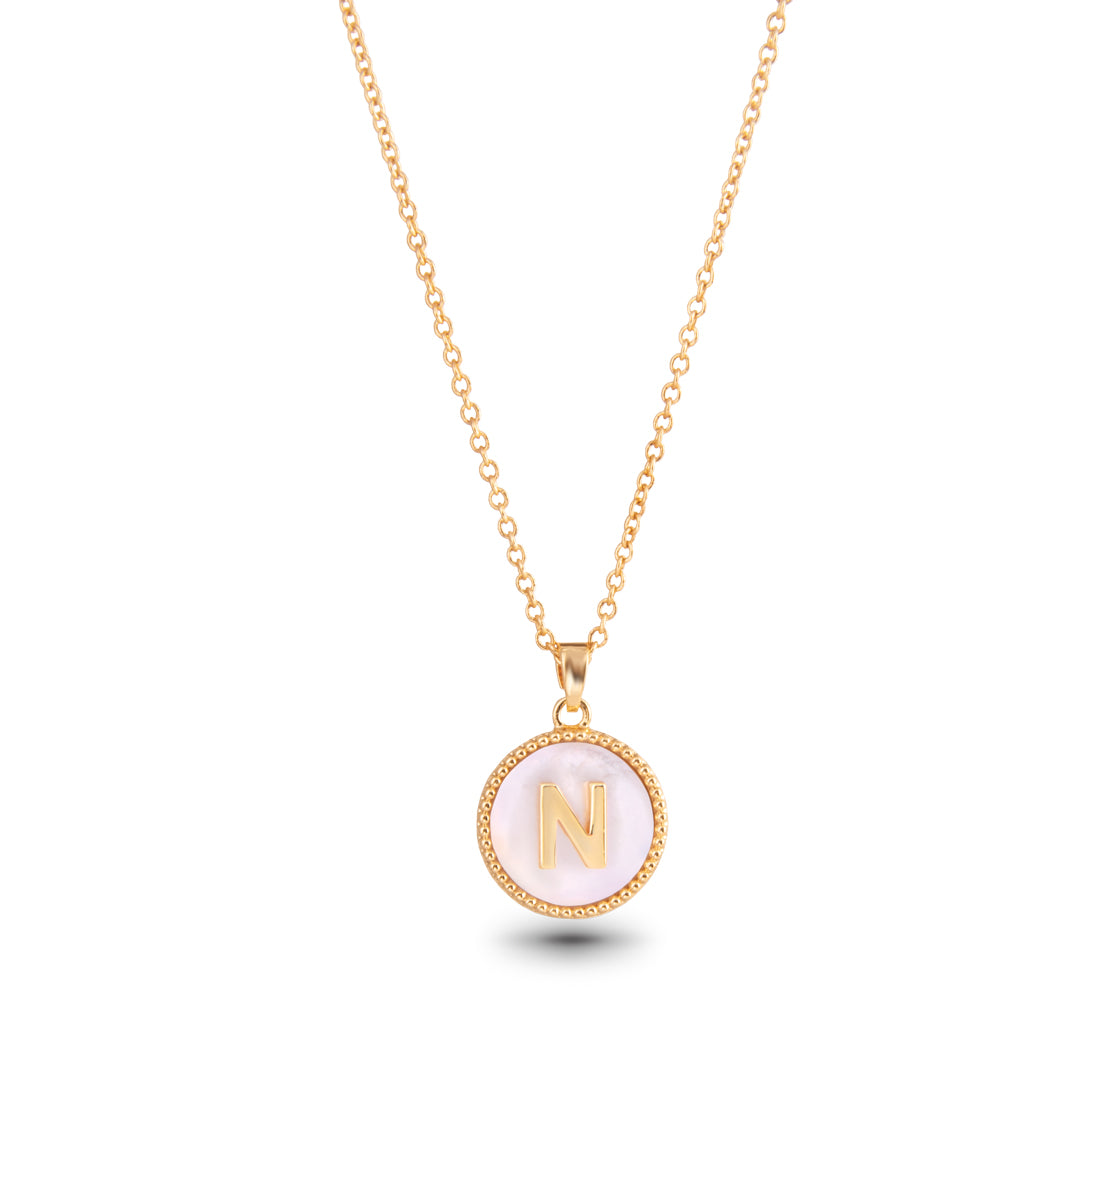 Gold Mother of Pearl Initial Necklace - N